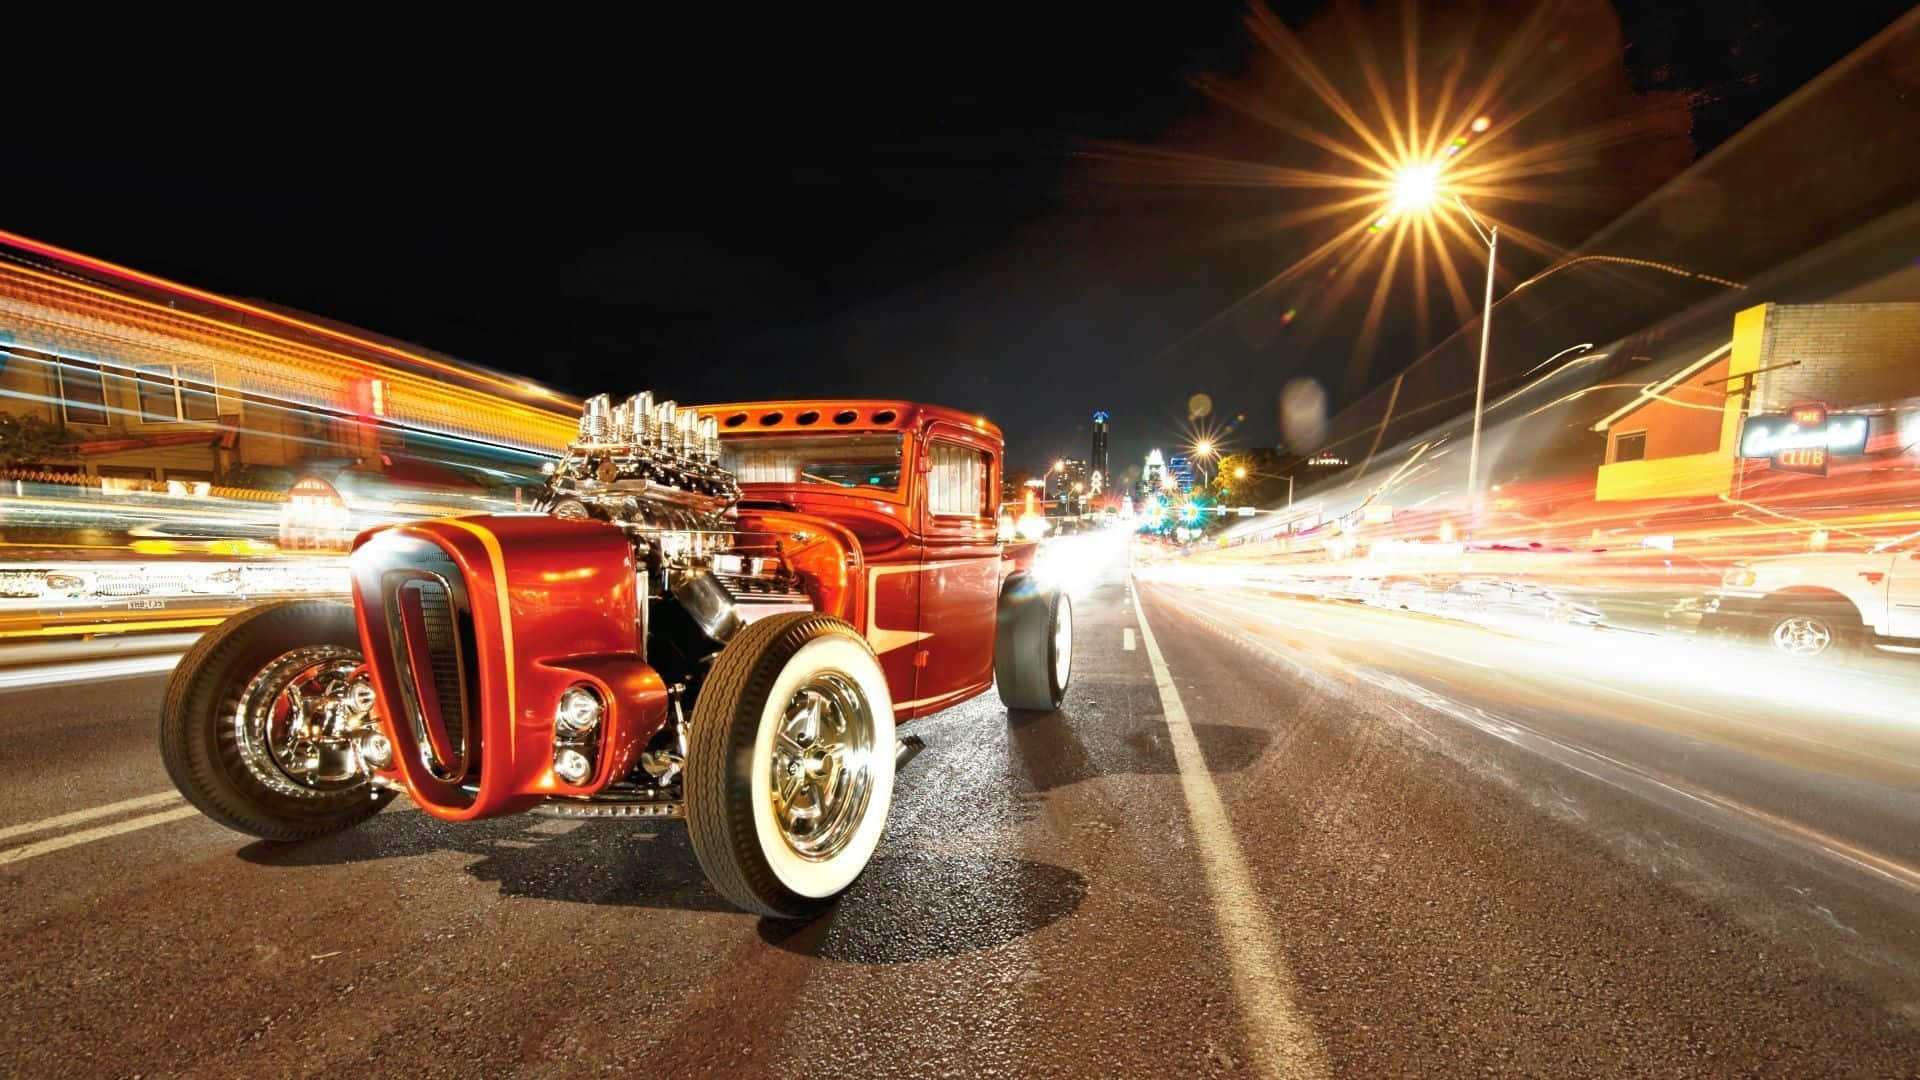 Take a Cruise in this Classic Hot Rod Wallpaper